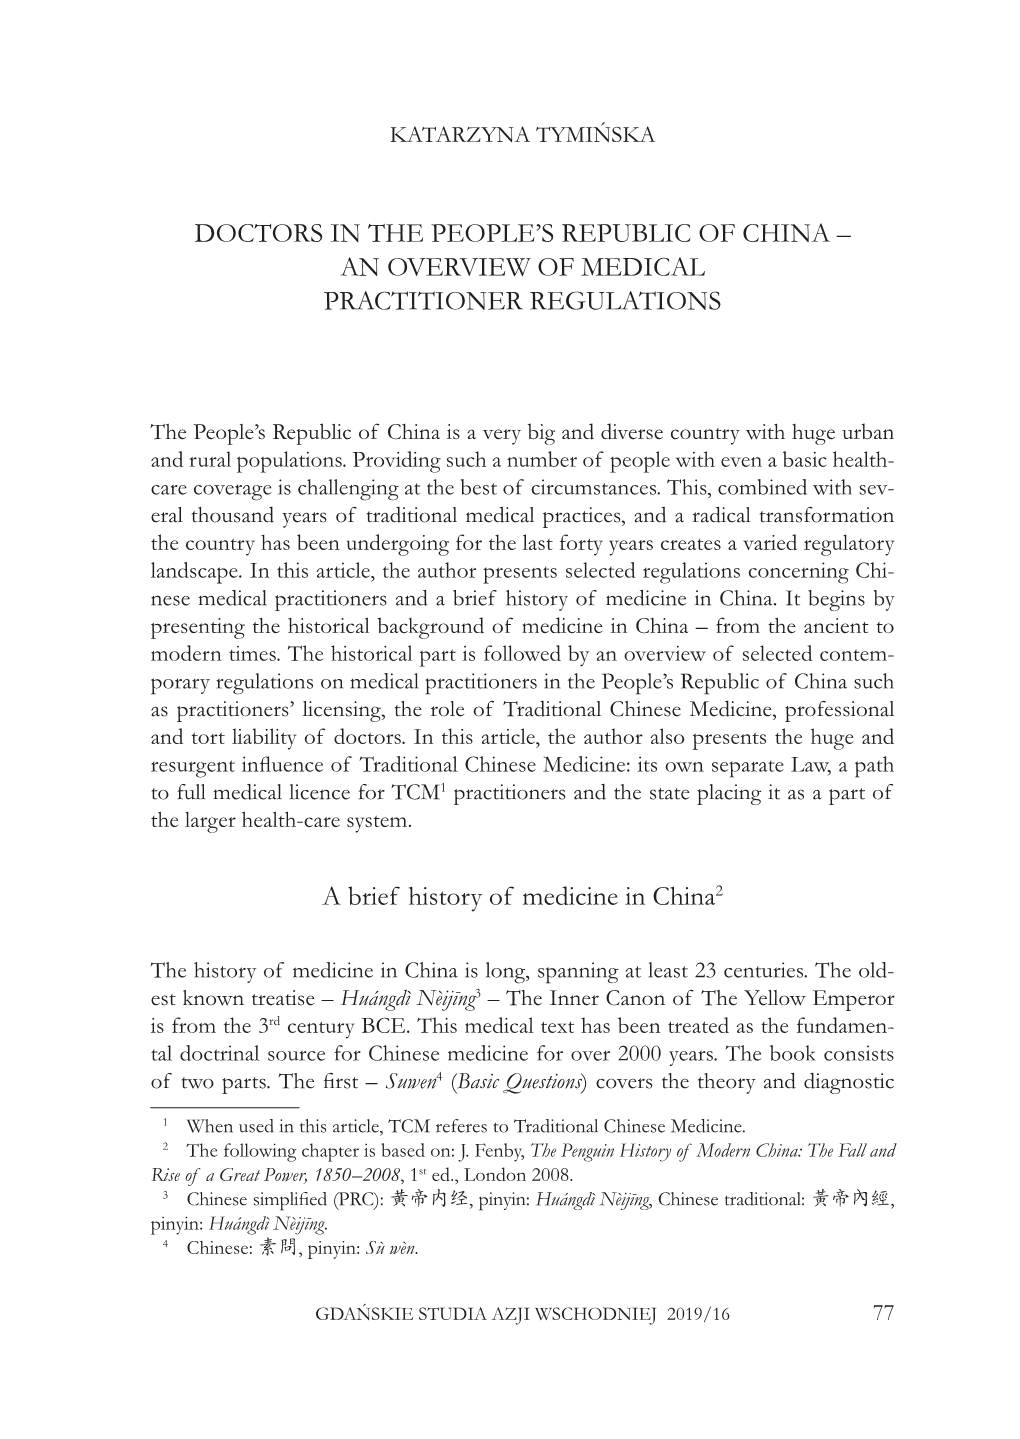 Doctors in the People's Republic of China – an Overview of Medical Practitioner Regulations